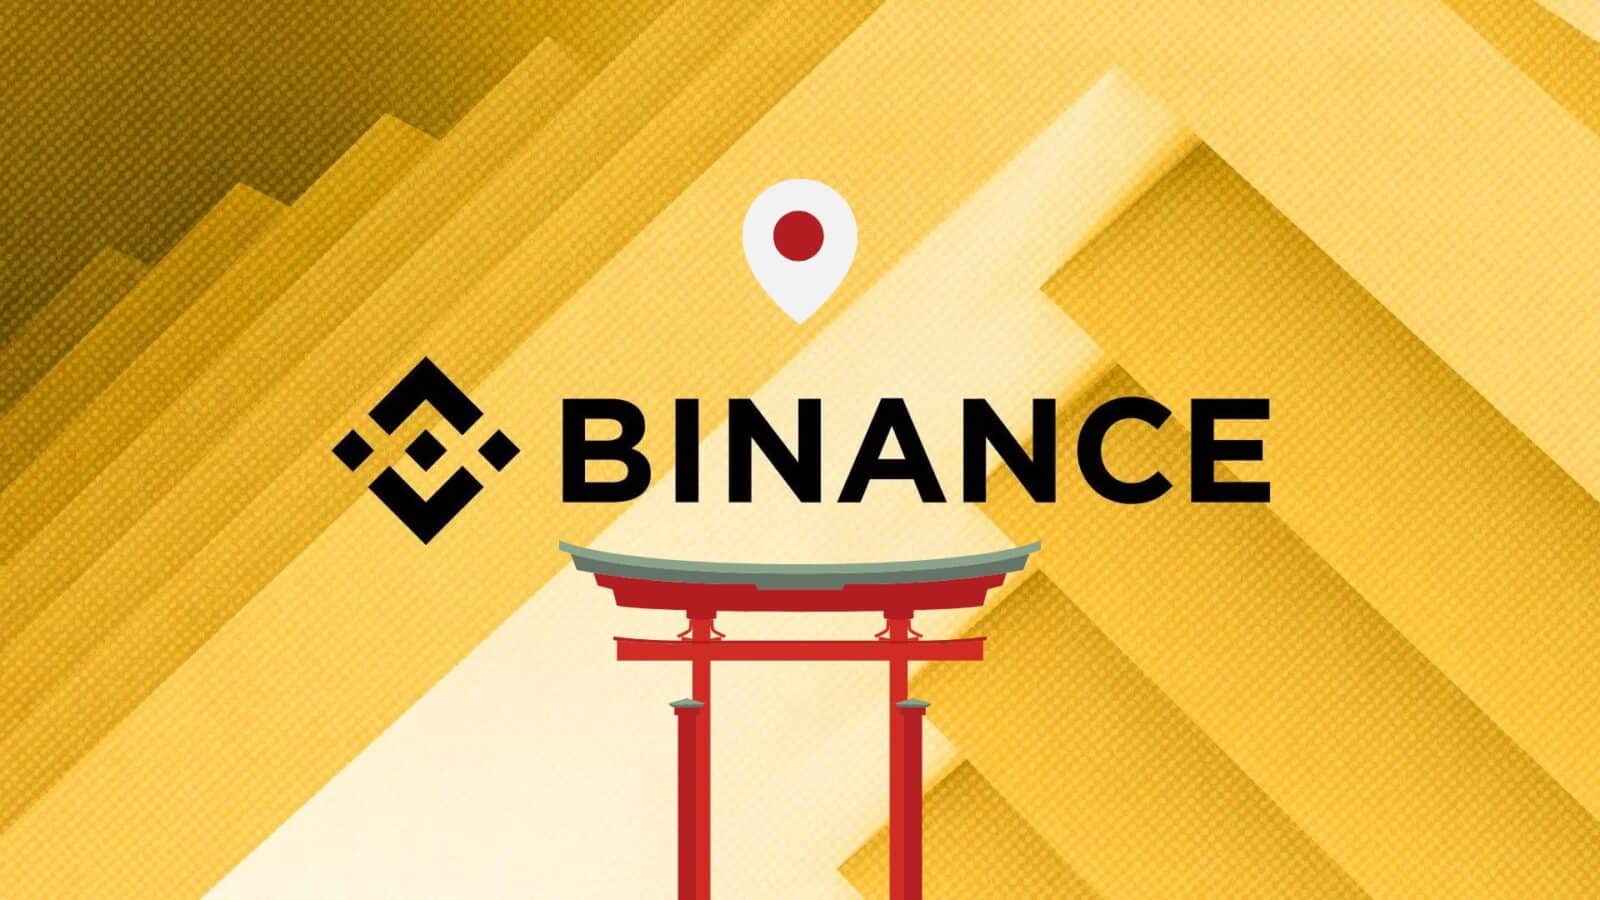 Binance to Expand in the Japanese Market with a Regulatory-Compliant Exchange